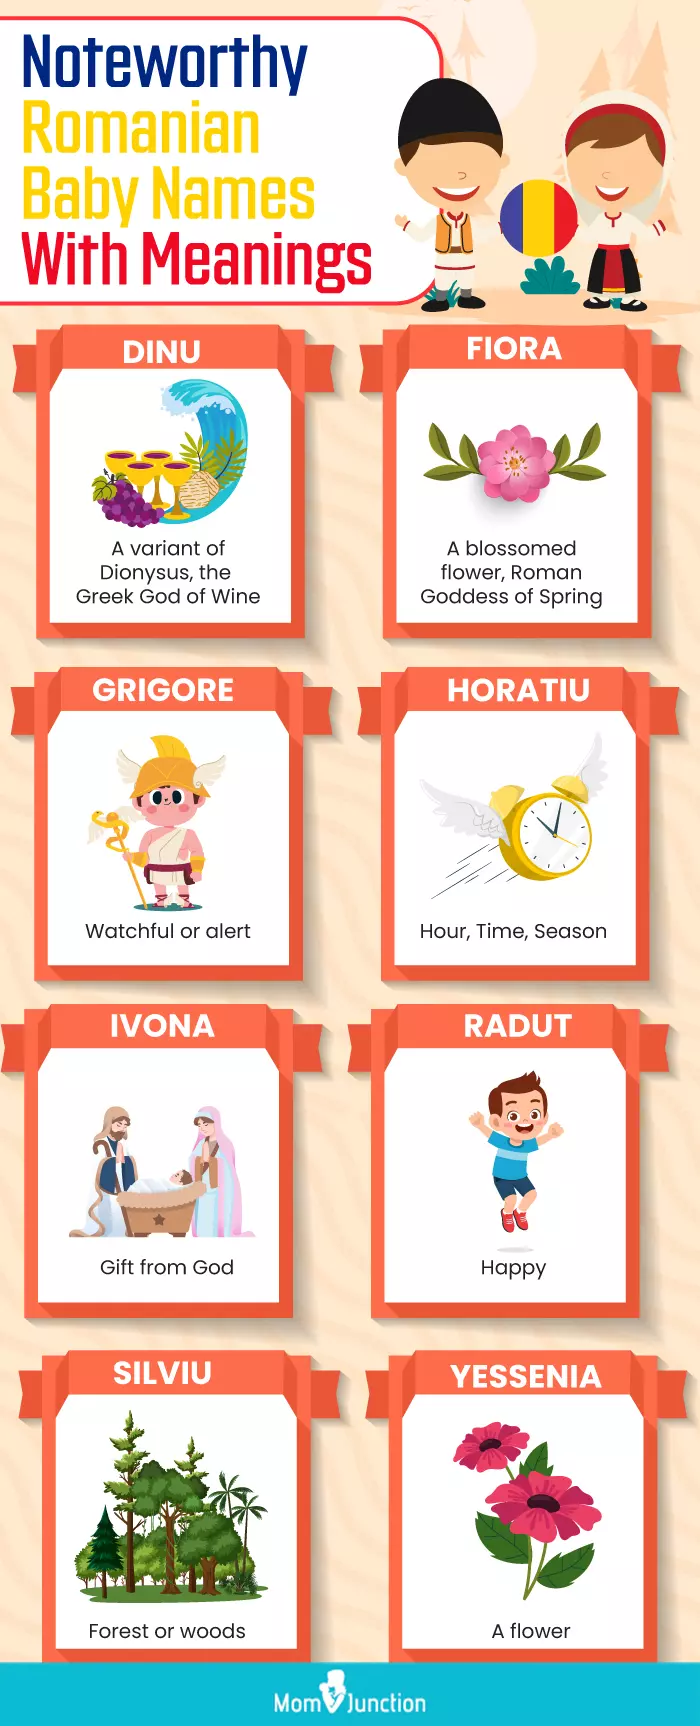 noteworthy romanian baby names with meanings (infographic)